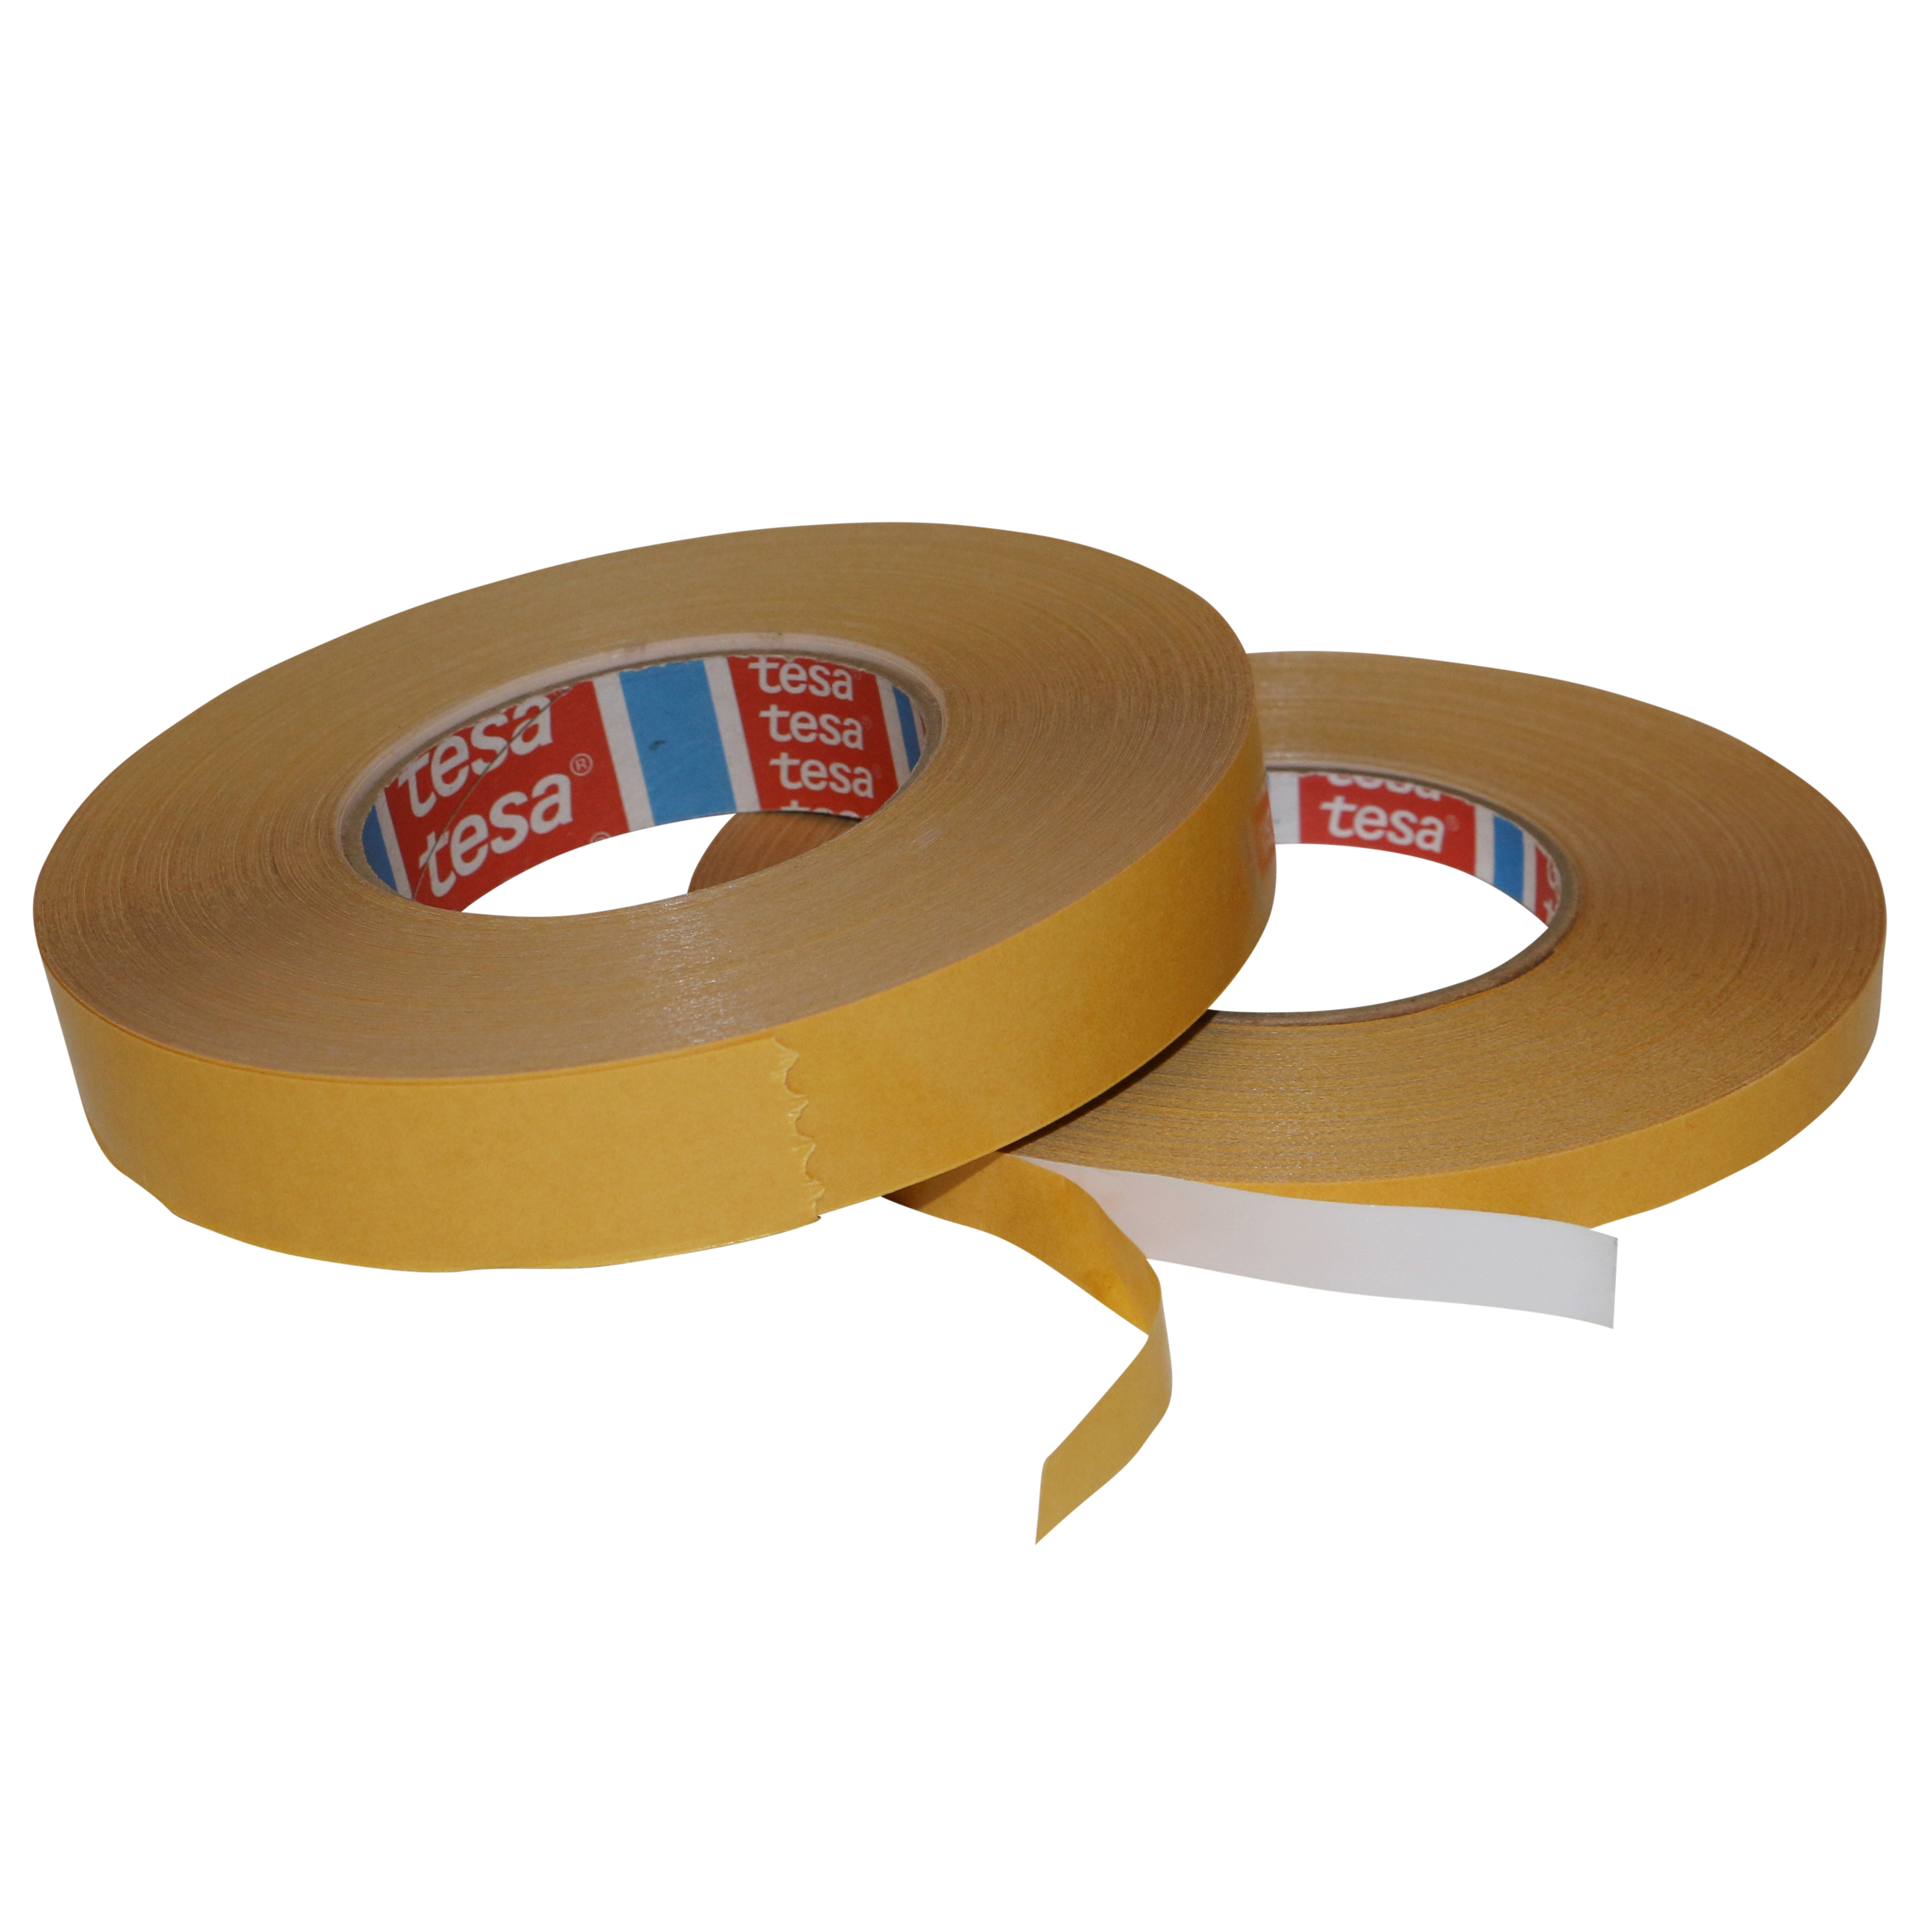 1/2 in tesa 4970 Double Sided White PVC Tape White x 60 yds. 